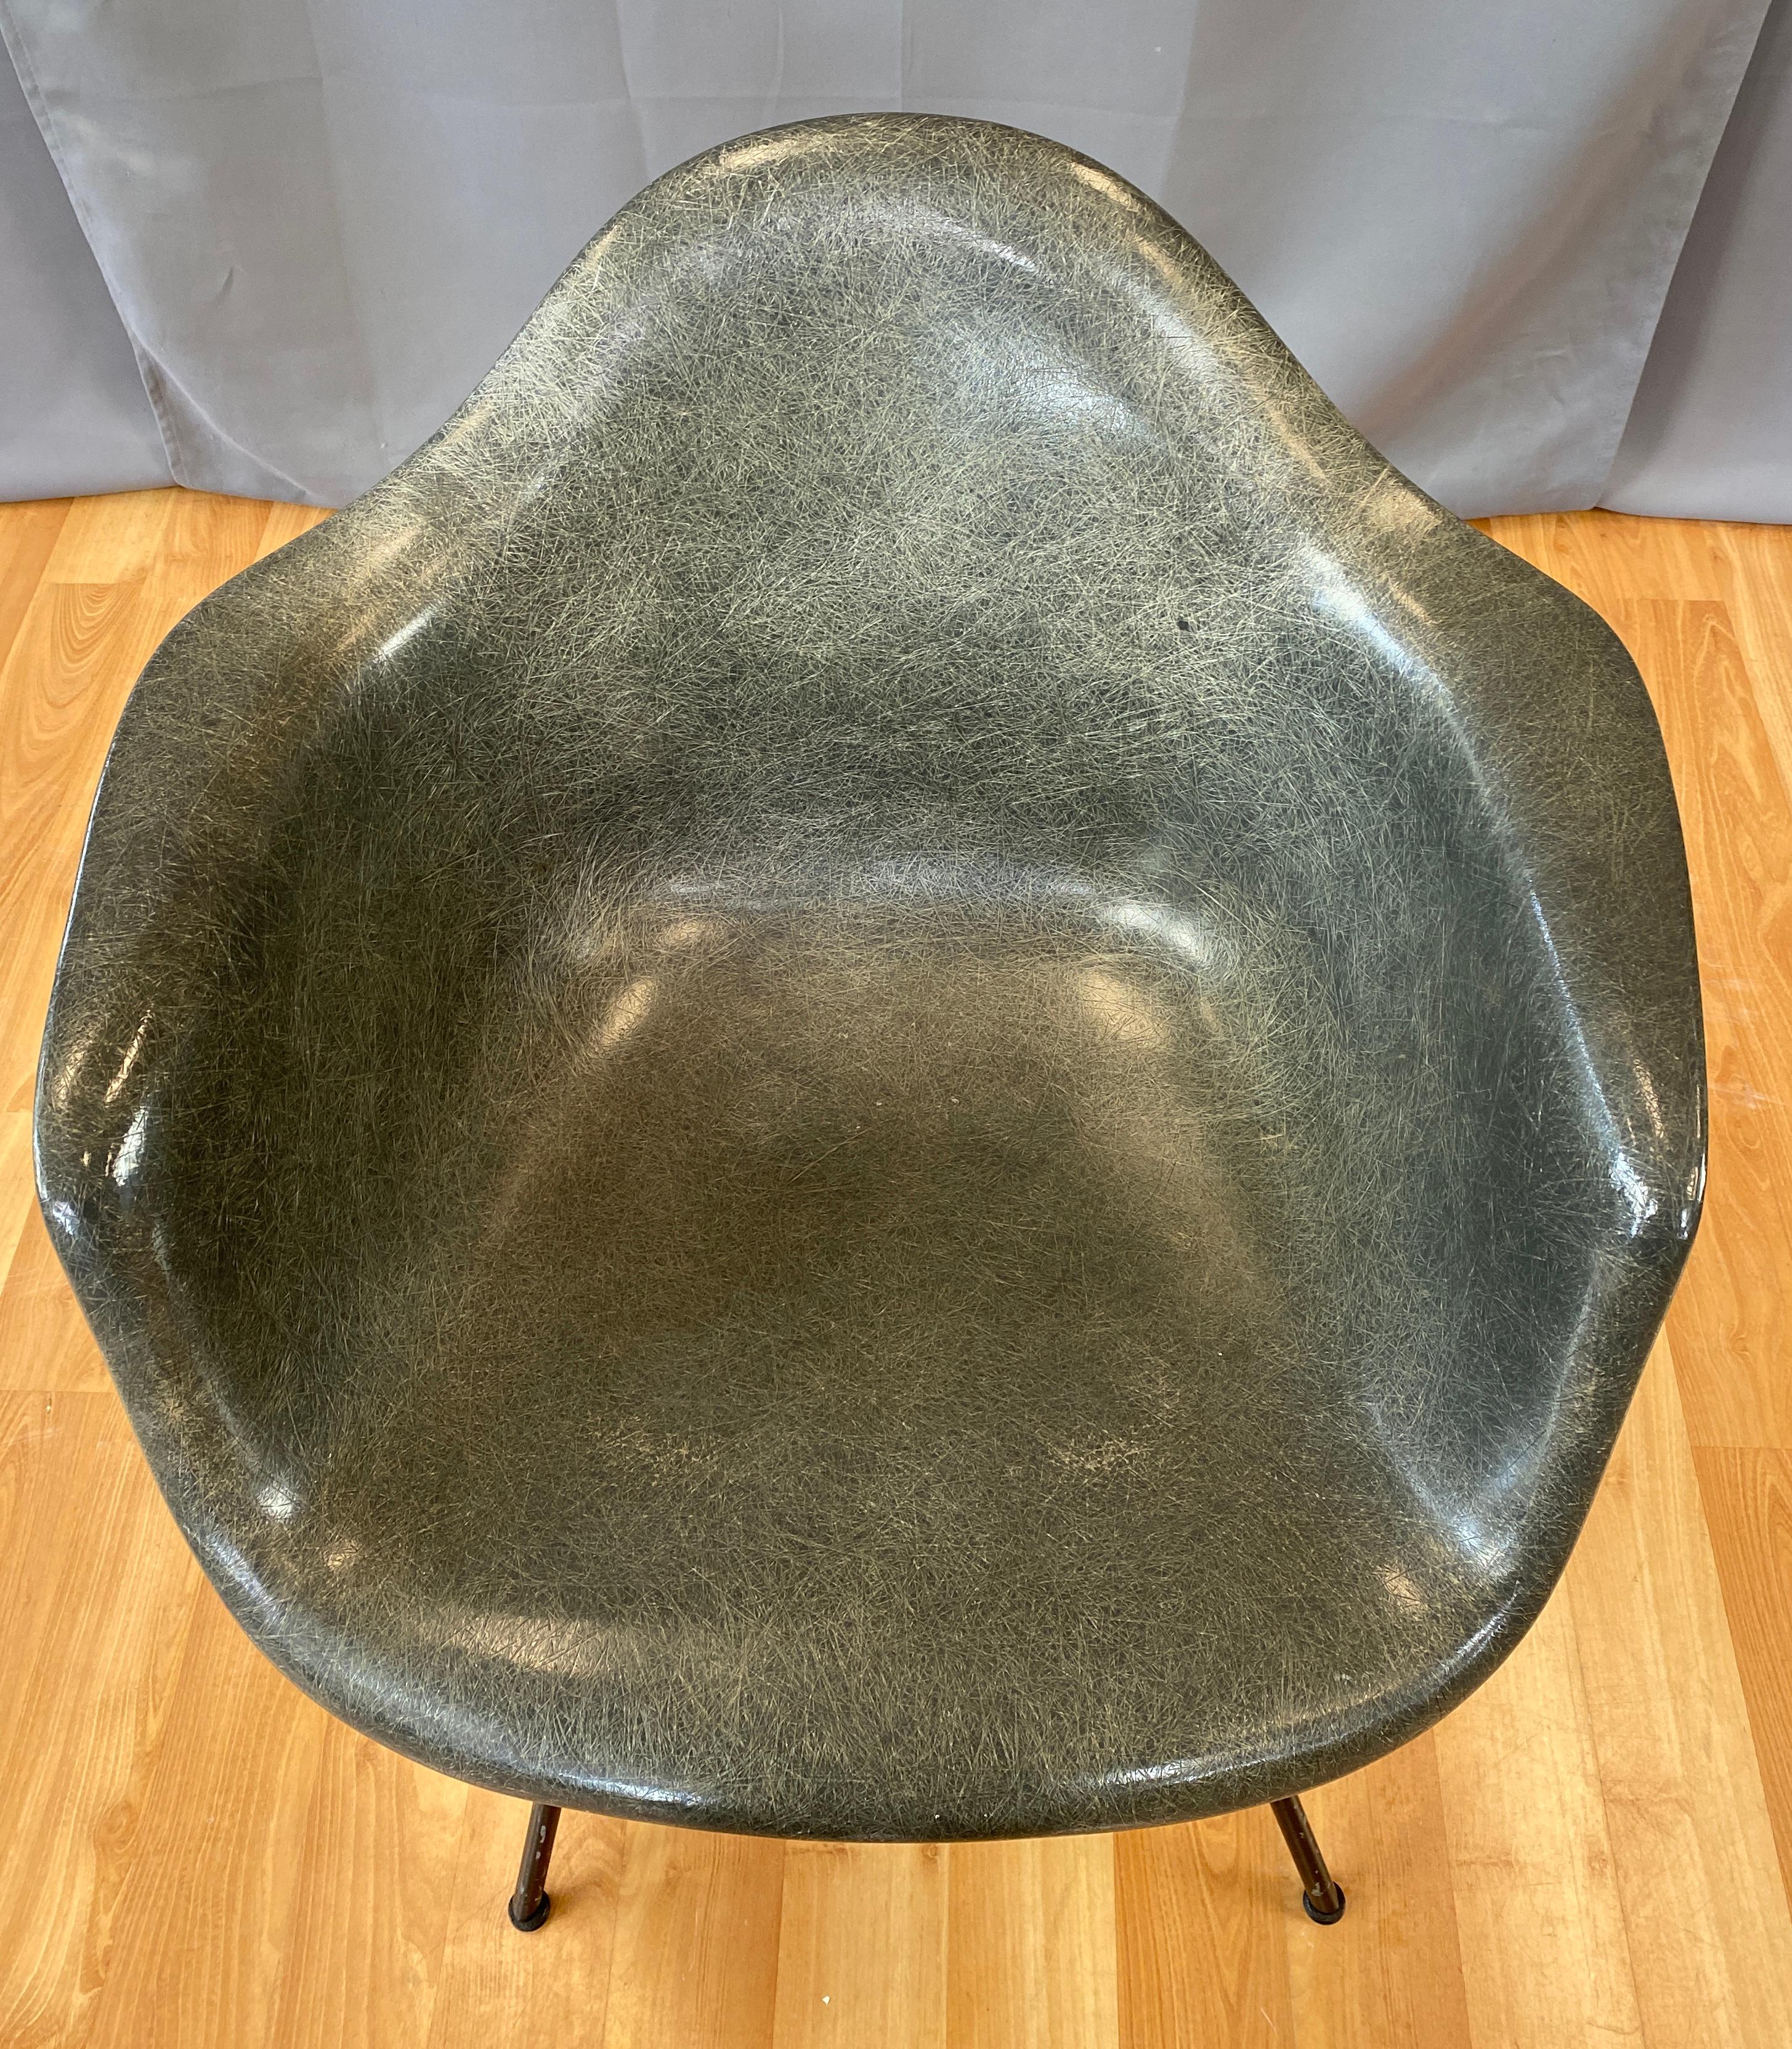 Metal 1st Generation Zenith Plastic Rope Edge Chair, Charles Eames for Herman Miller A